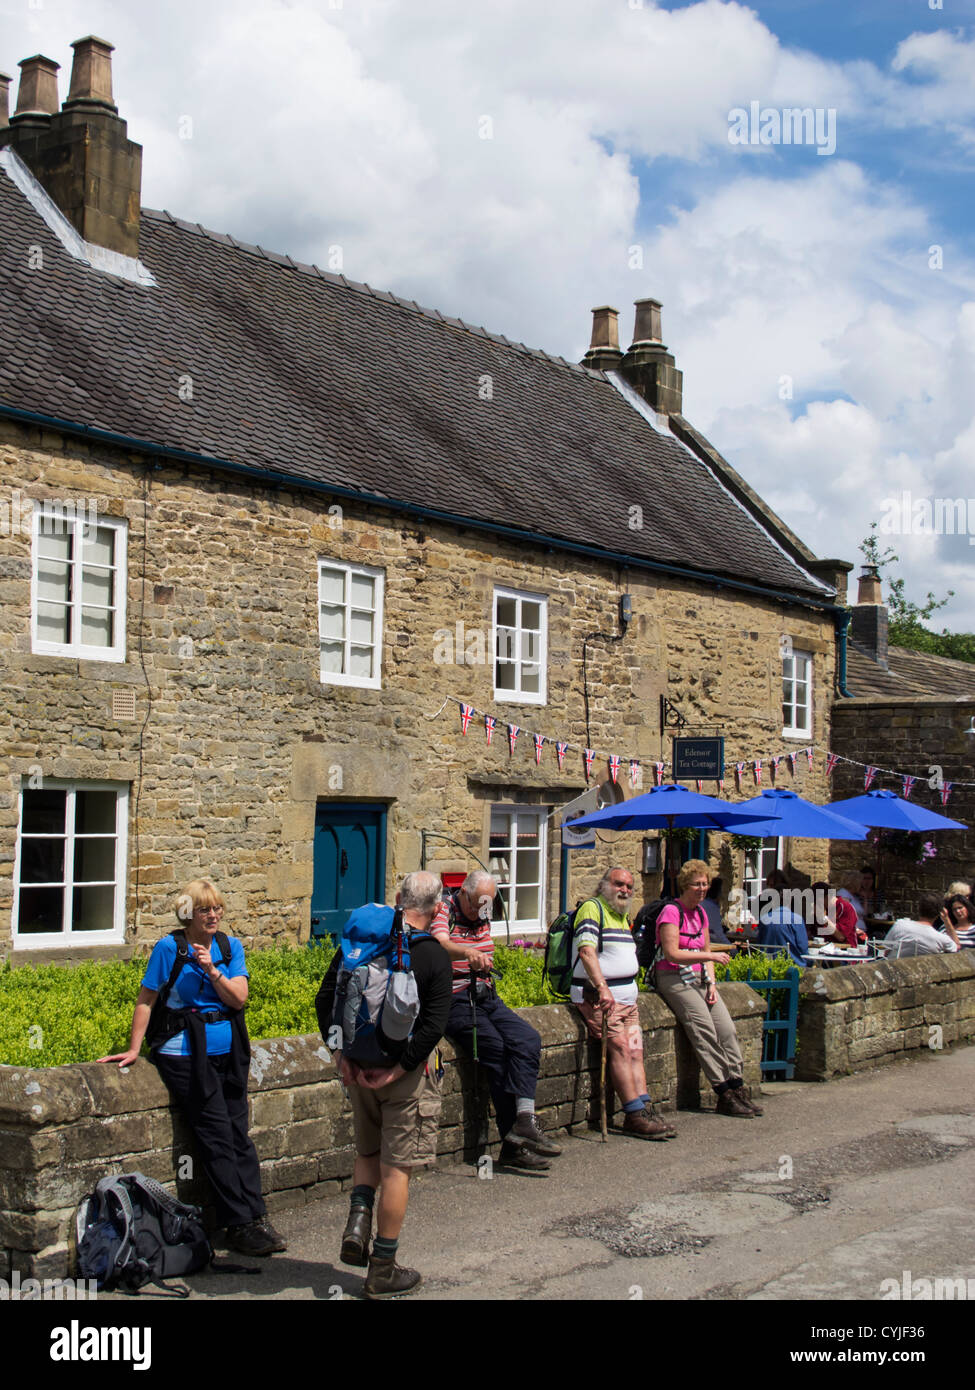 Hikers and walkers standing outside the tea rooms in Edensor village on the Chatsworth Estate in Derbyshire England Stock Photo